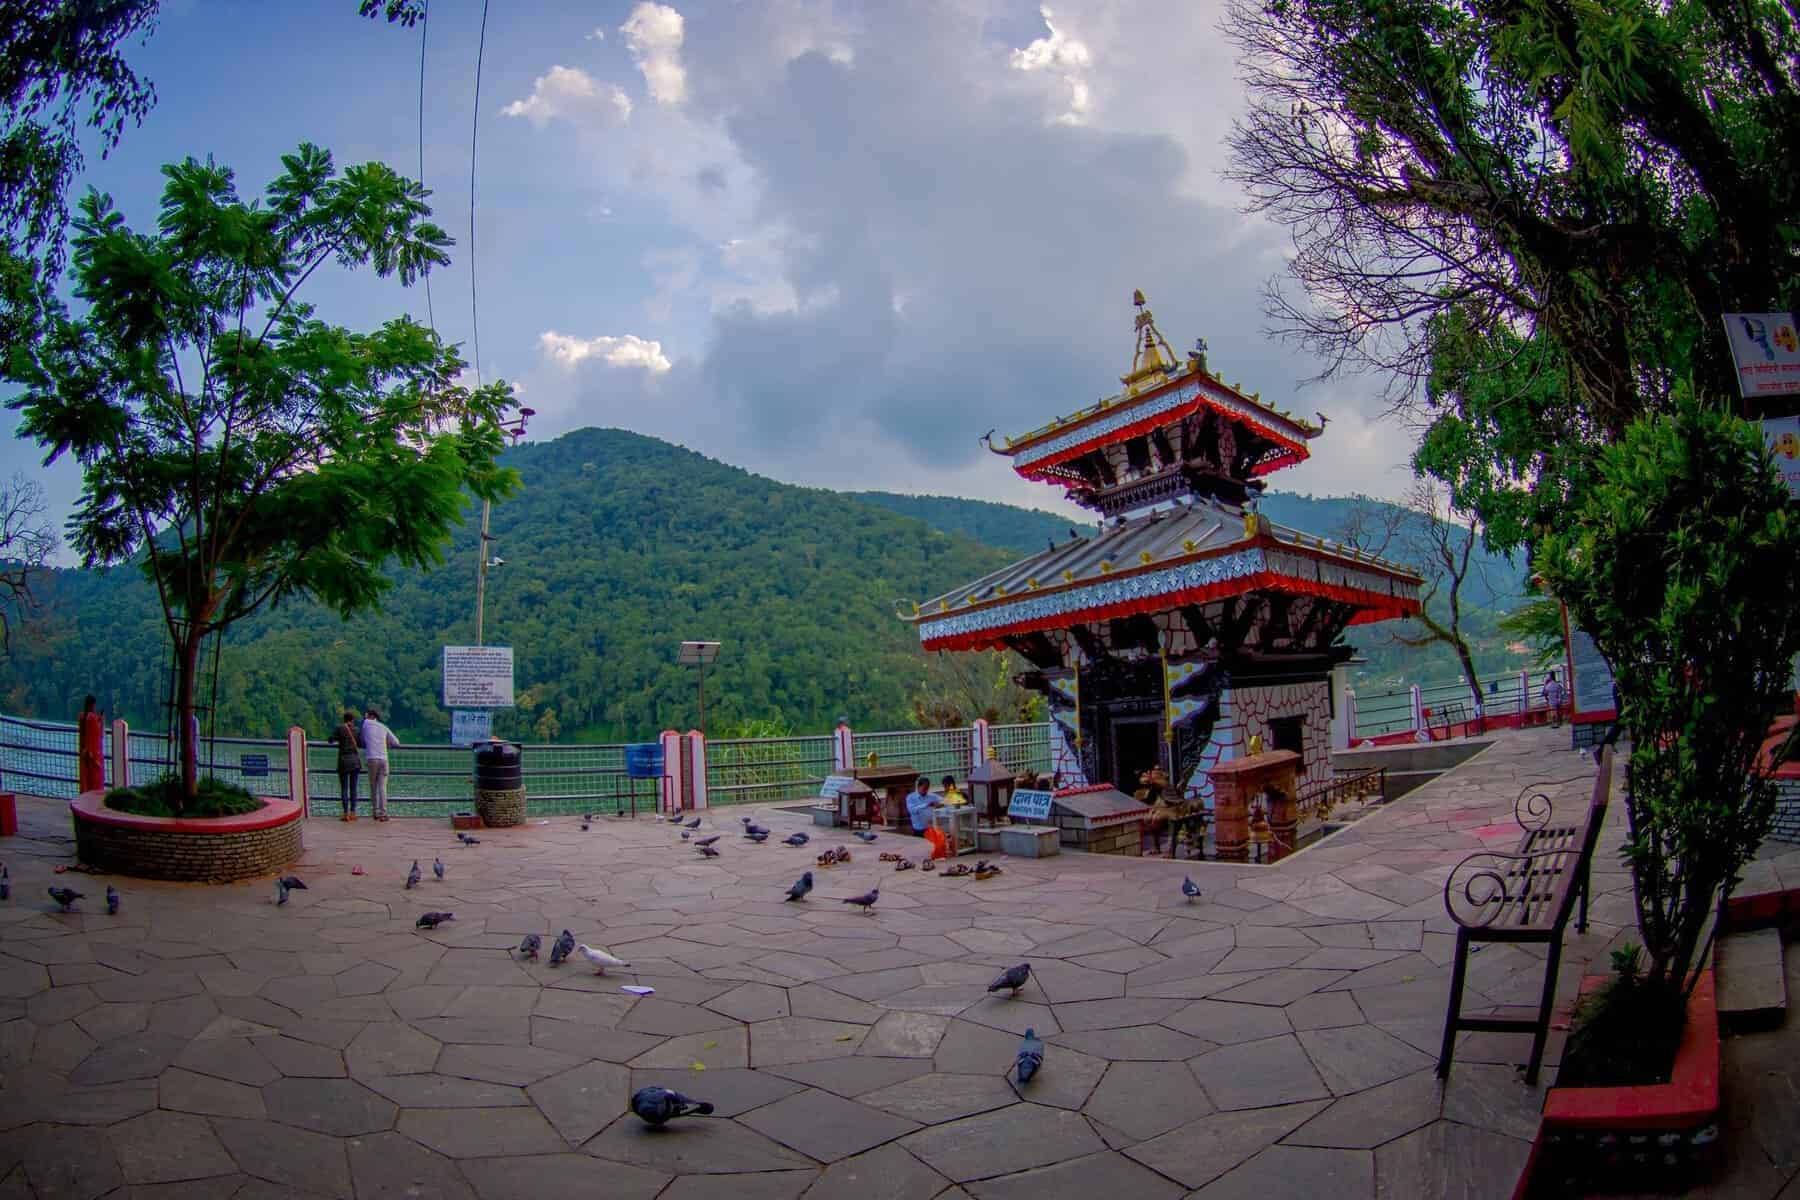 POKHARA, NEPAL -People walking around of Tal Barahi Temple, located at the center of Phewa Lake, is the most important religious monument of Pokhara.